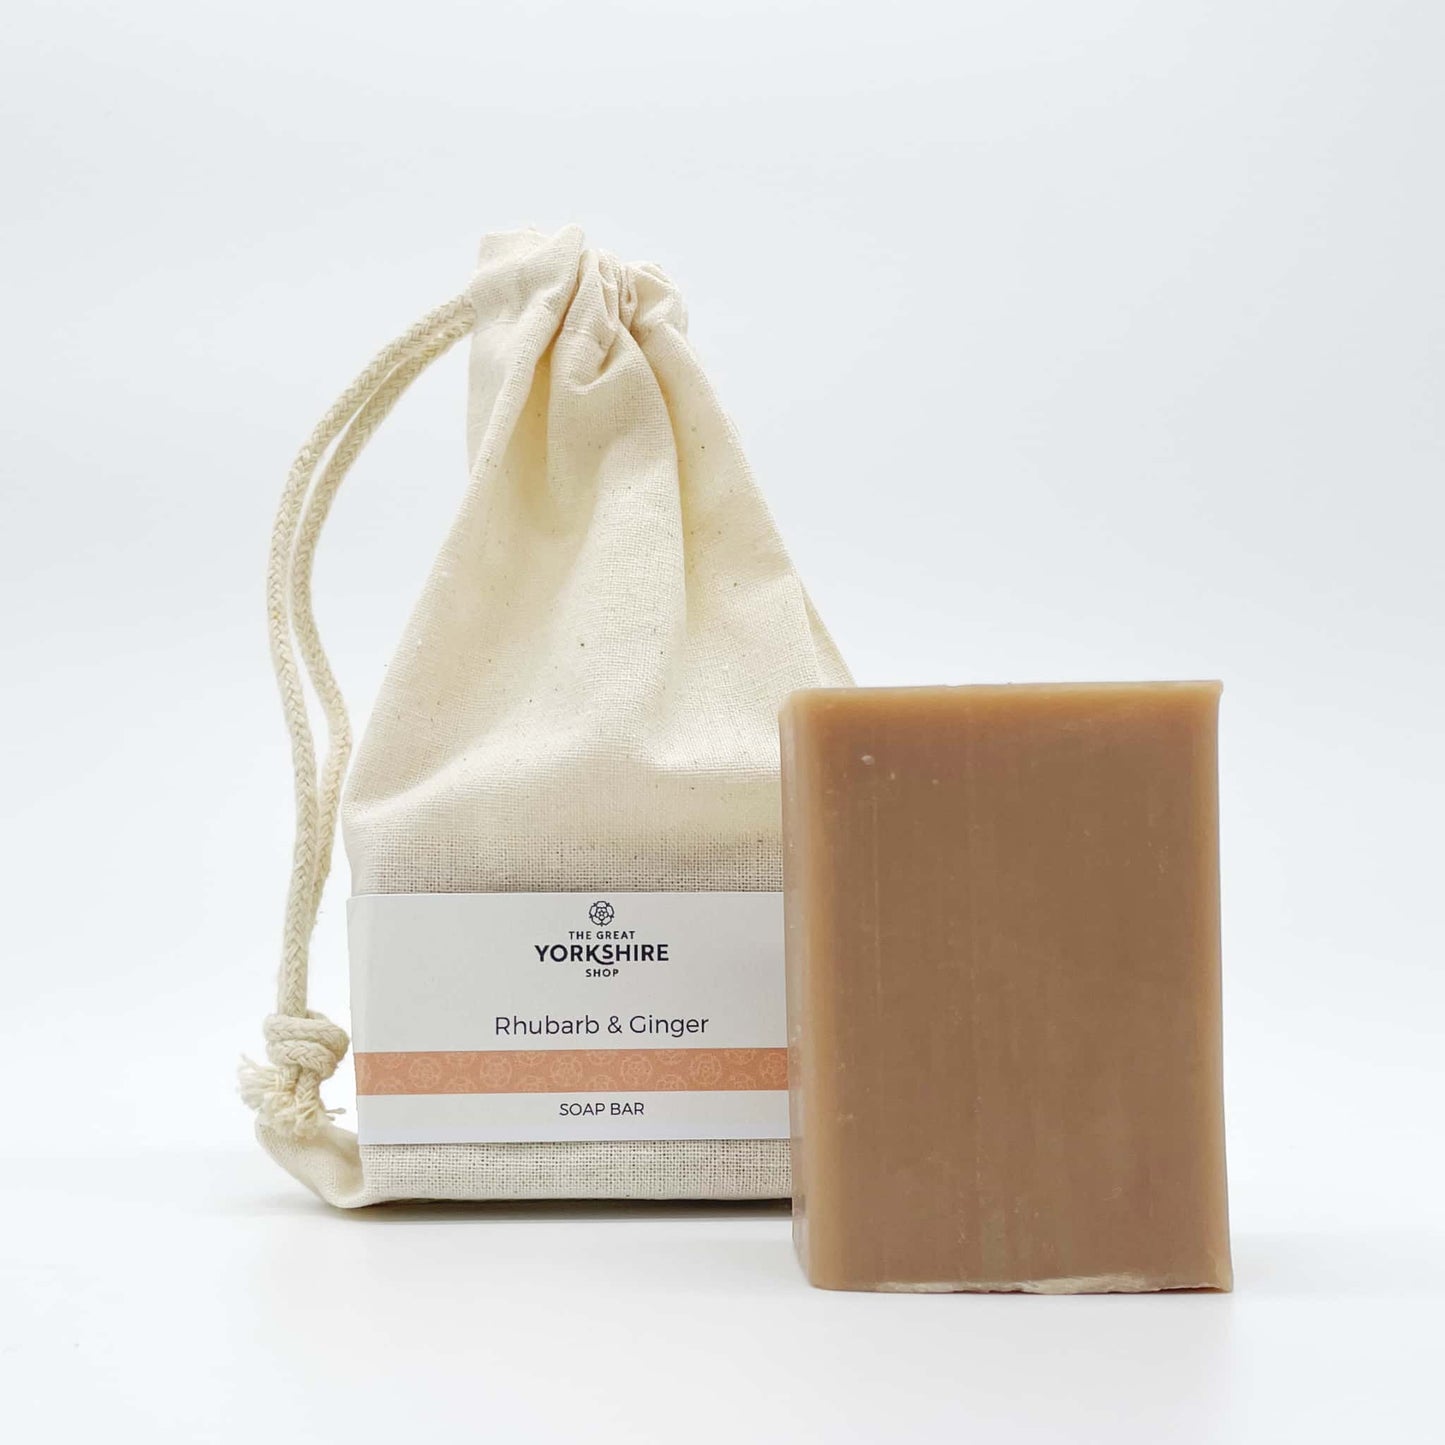 Rhubarb & Ginger Soap Bar - The Great Yorkshire Shop